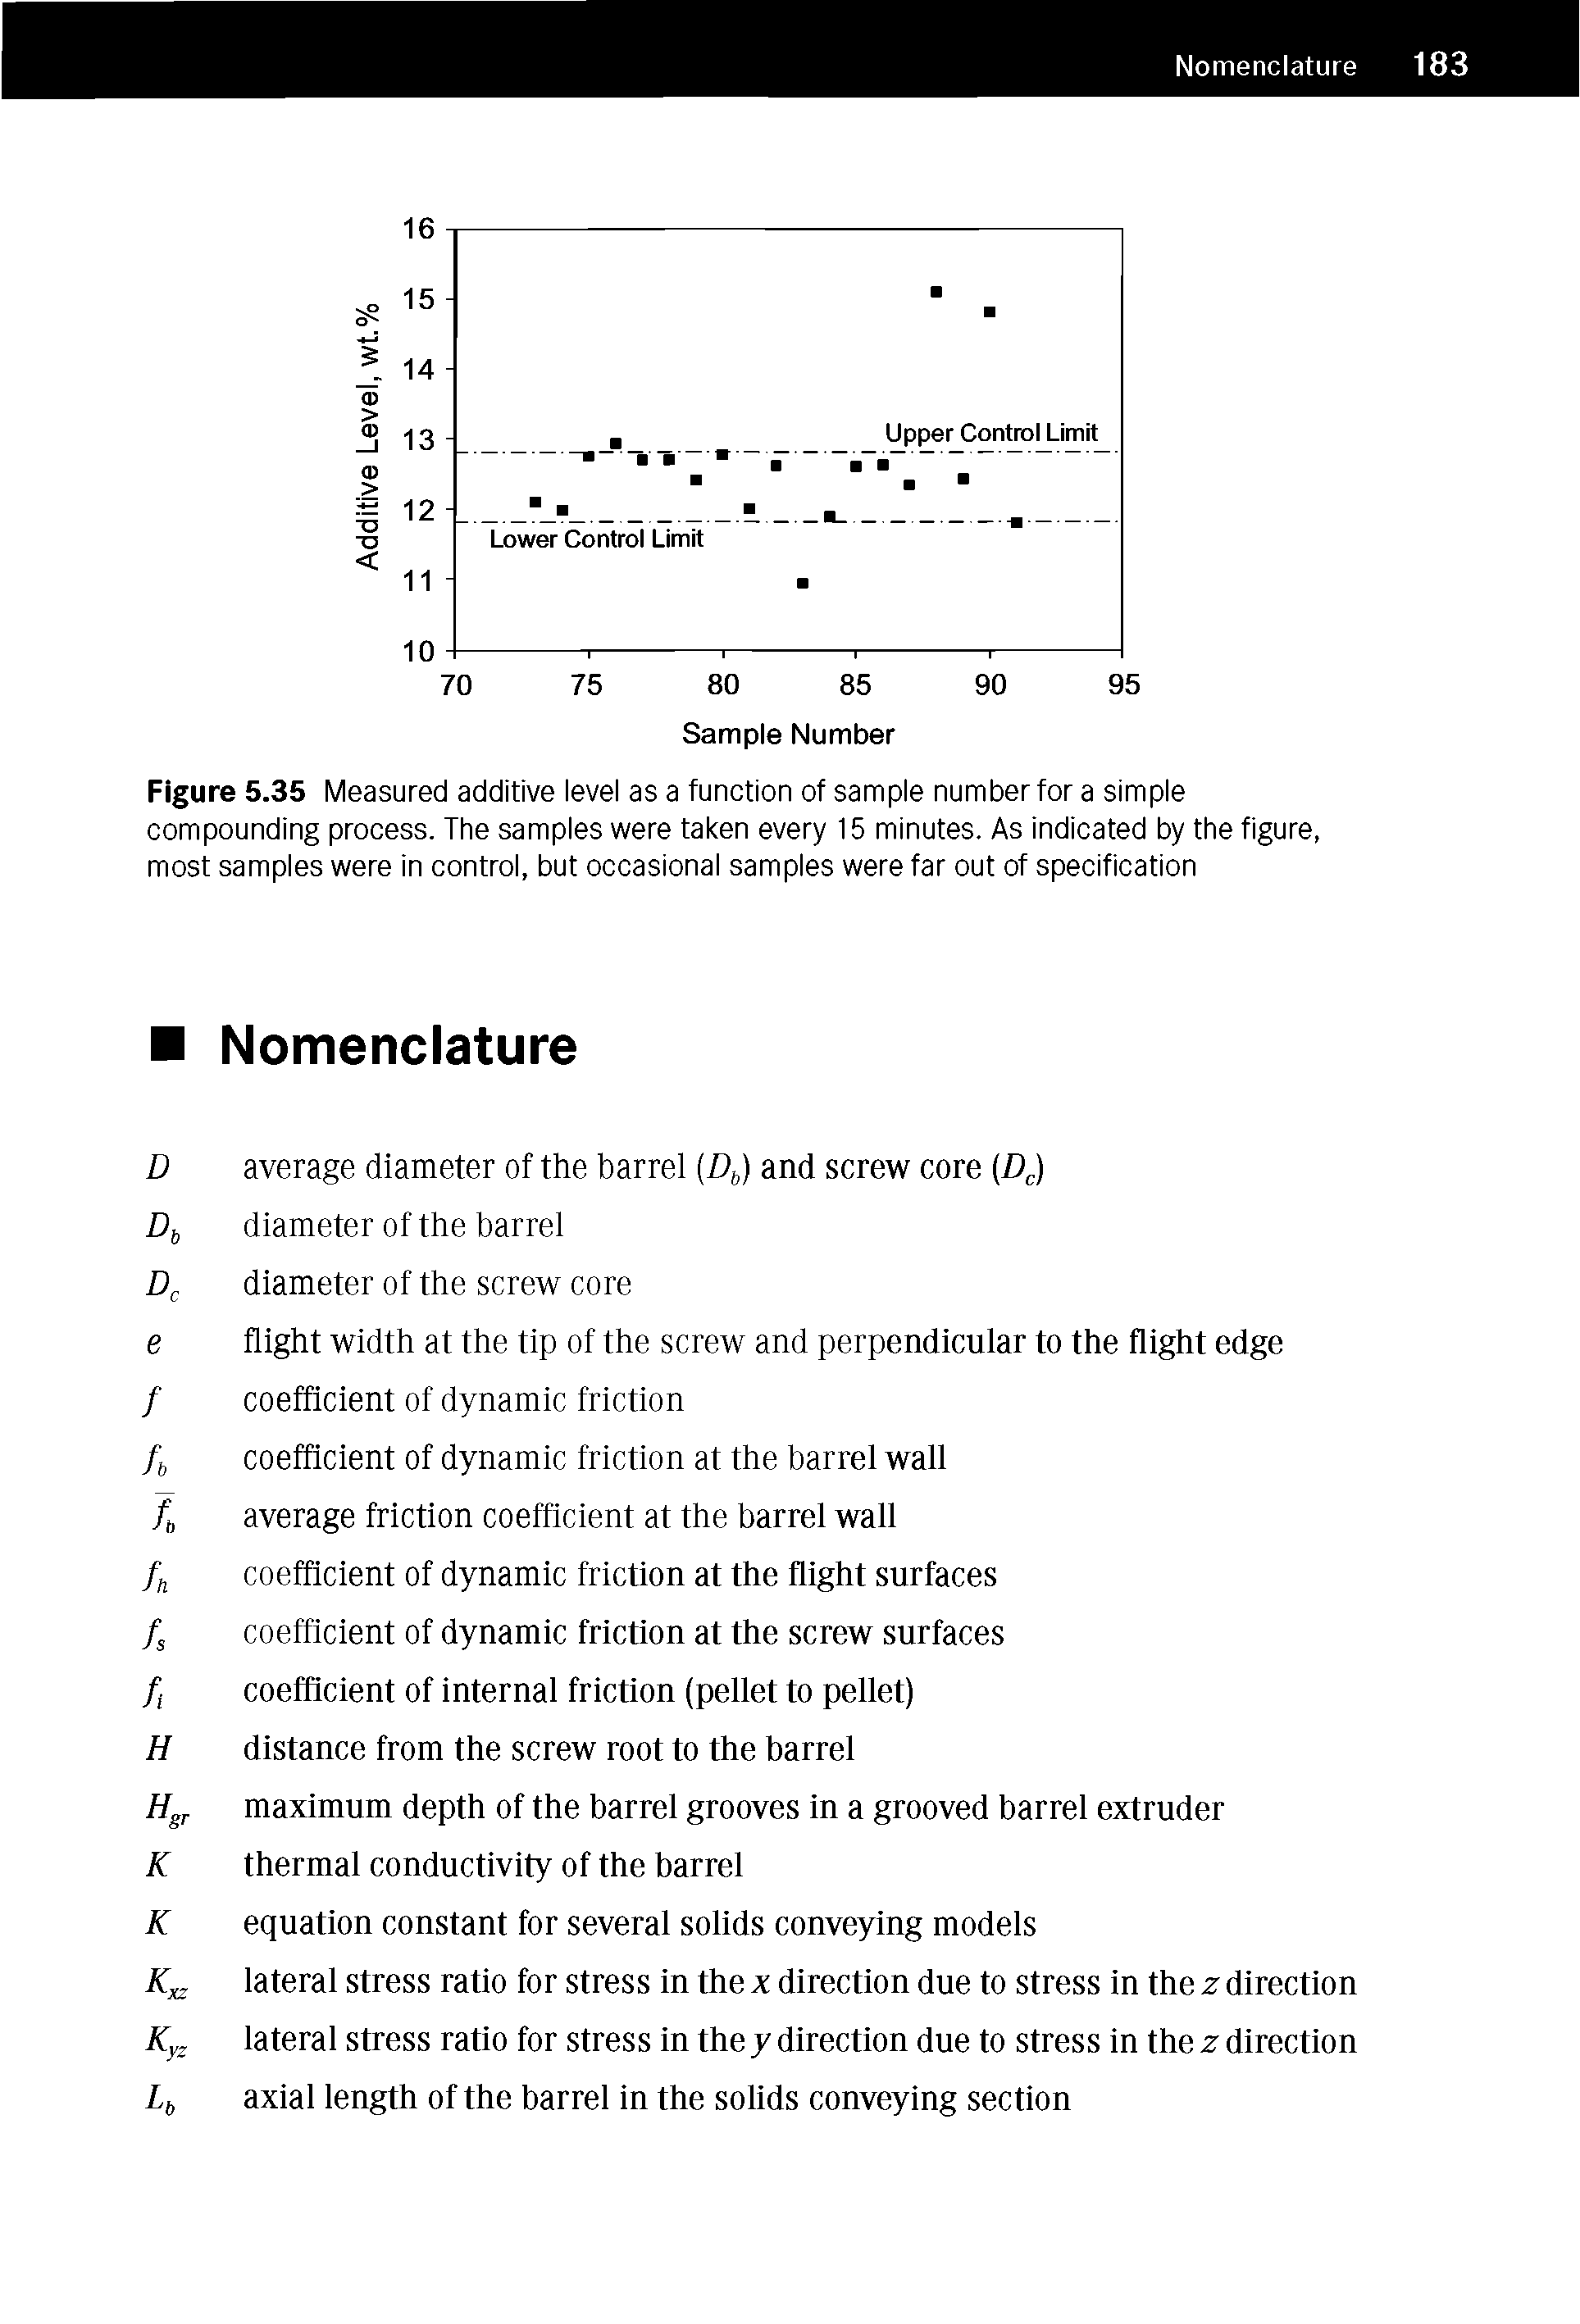 Figure 5.35 Measured additive level as a function of sample number for a simple compounding process. The samples were taken every 15 minutes. As indicated by the figure, most samples were in control, but occasional samples were far out of specification...